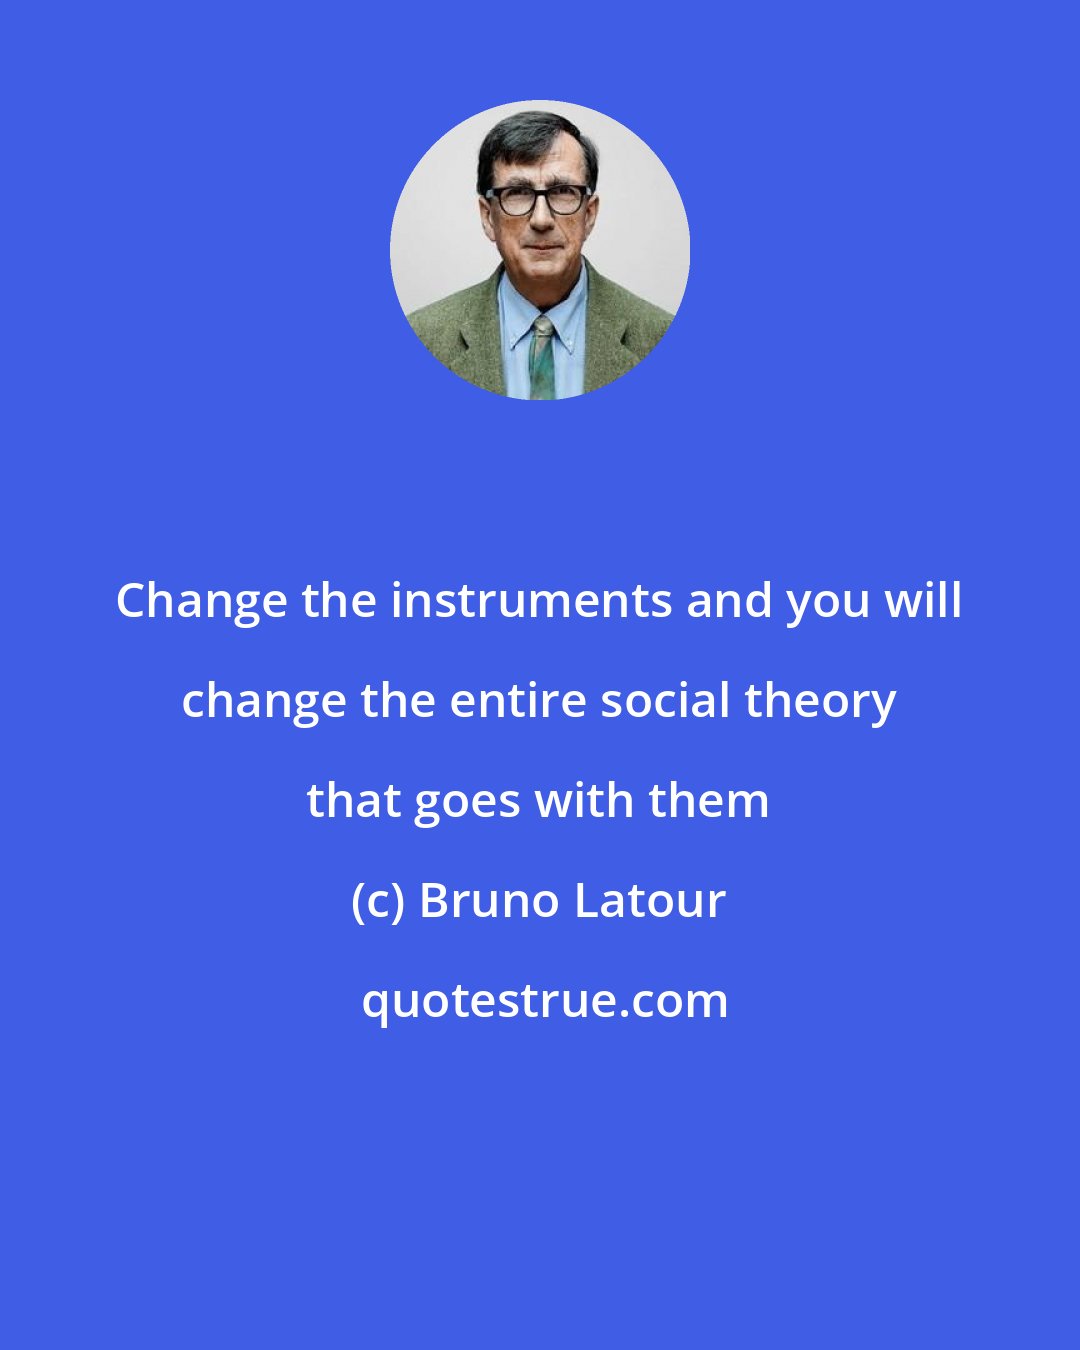 Bruno Latour: Change the instruments and you will change the entire social theory that goes with them